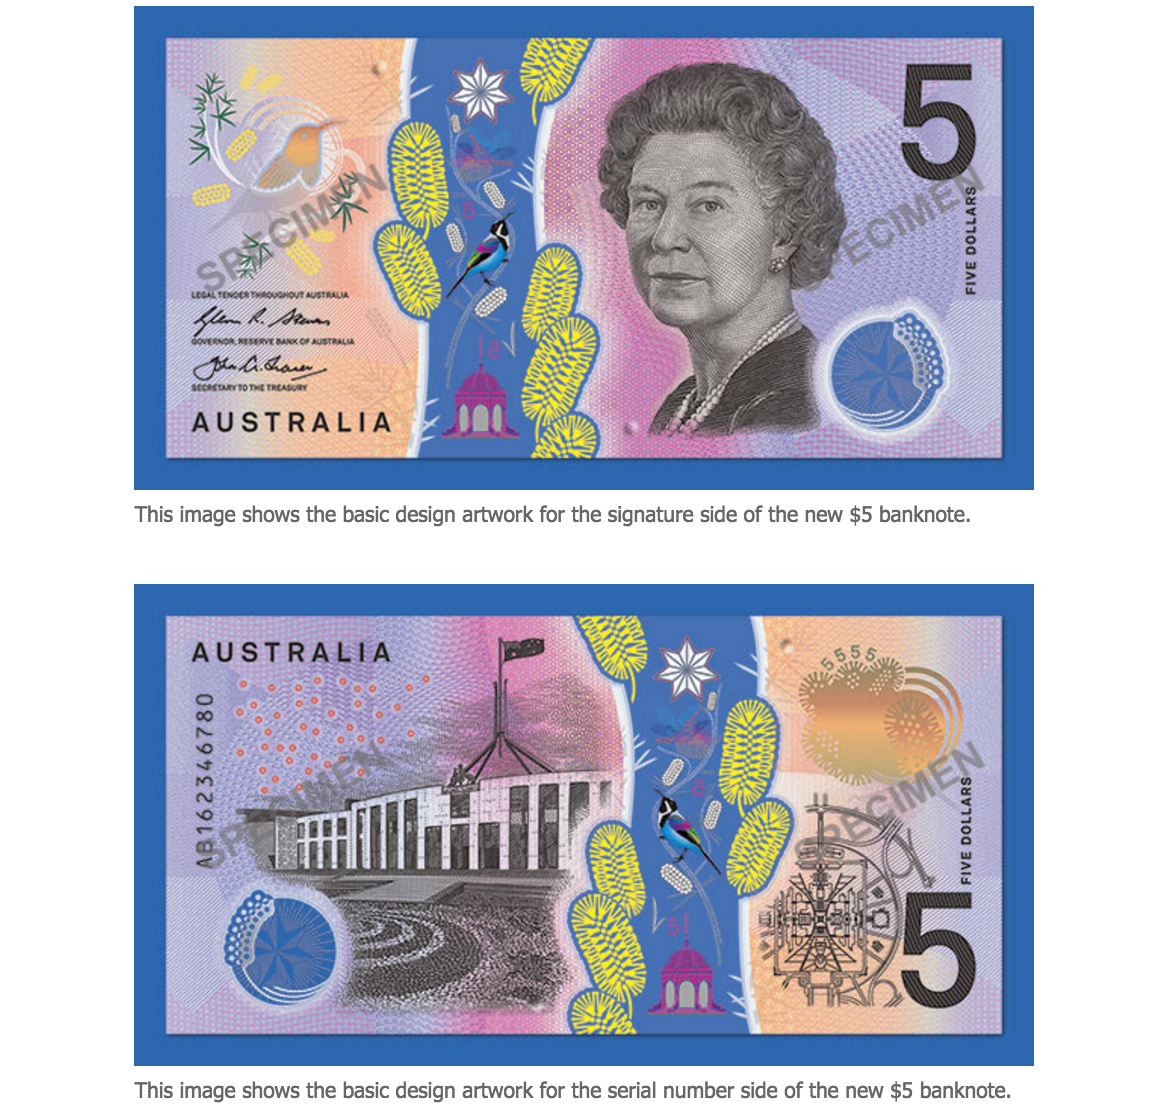 'HIDEOUS.' Australia's new $5 bill, unveiled on April 12, 2016, gets criticized online. Screenshot from Reserve Bank of Australia website 